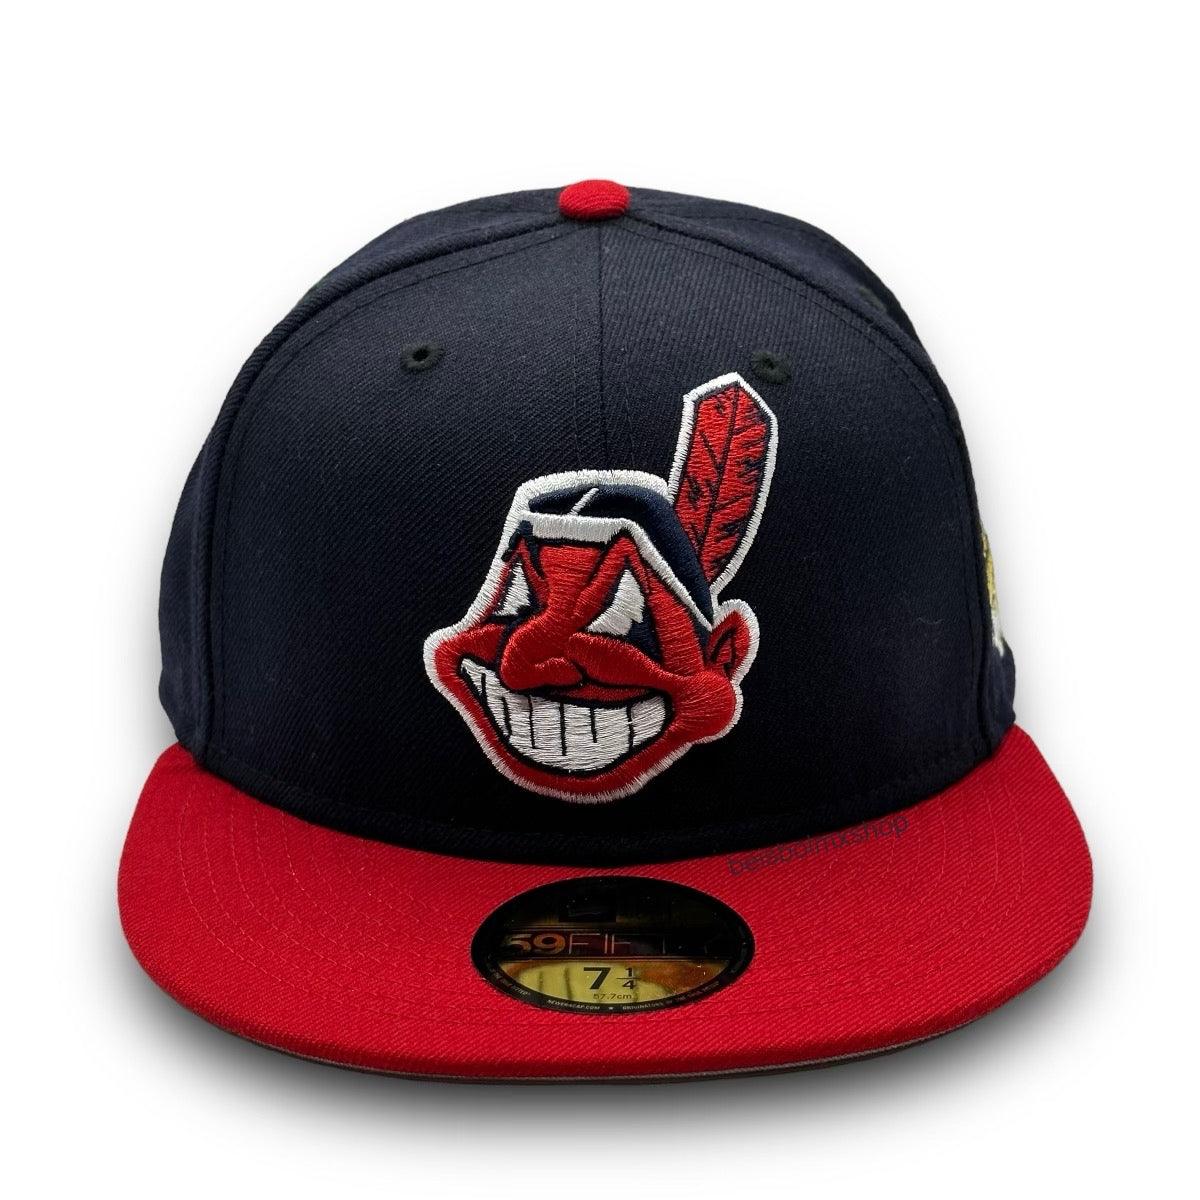 Cleveland Indians wahoo hat